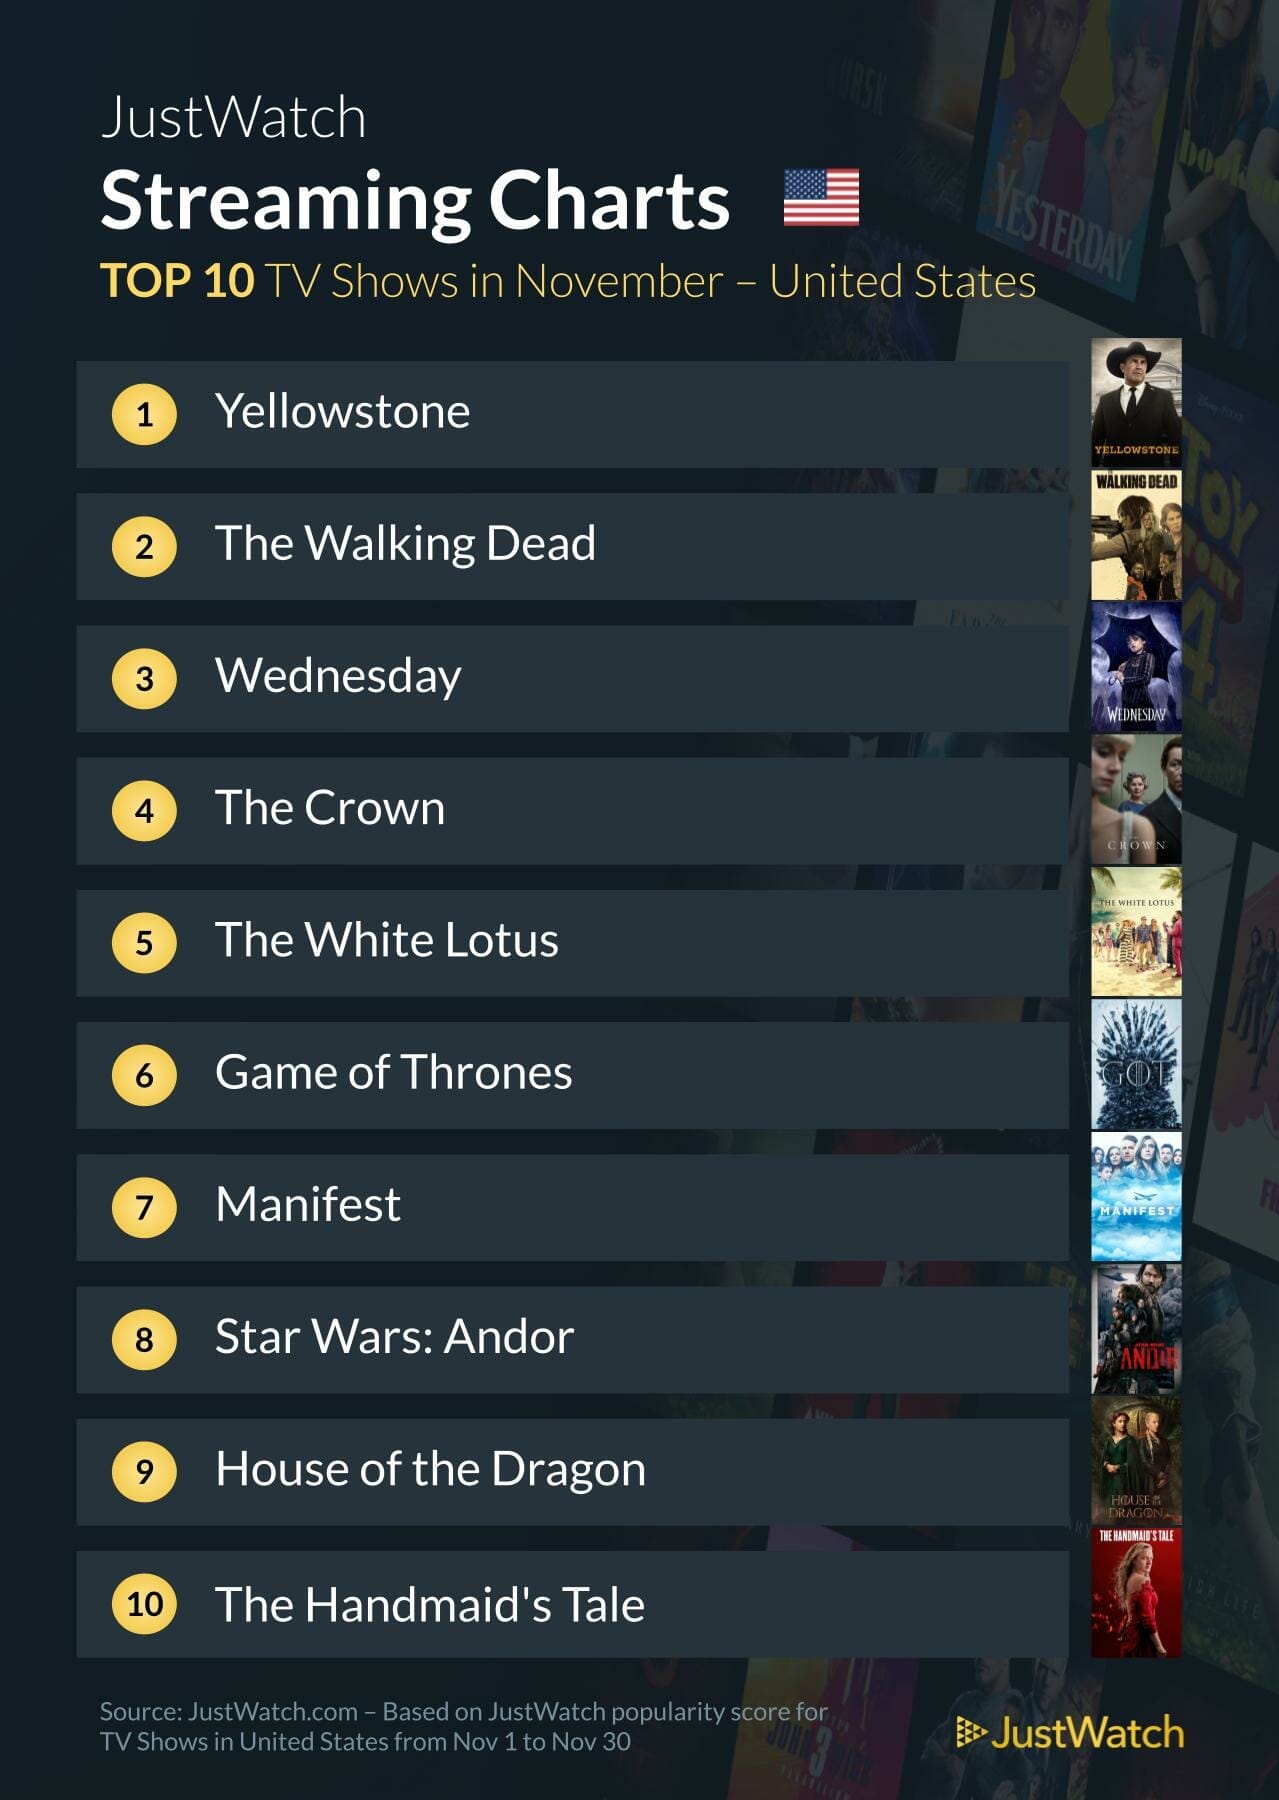 US streaming charts - top 10 tv shows;
Yellowstone, The Walking Dead, Wednesday, The Crown, The White Lotus et al